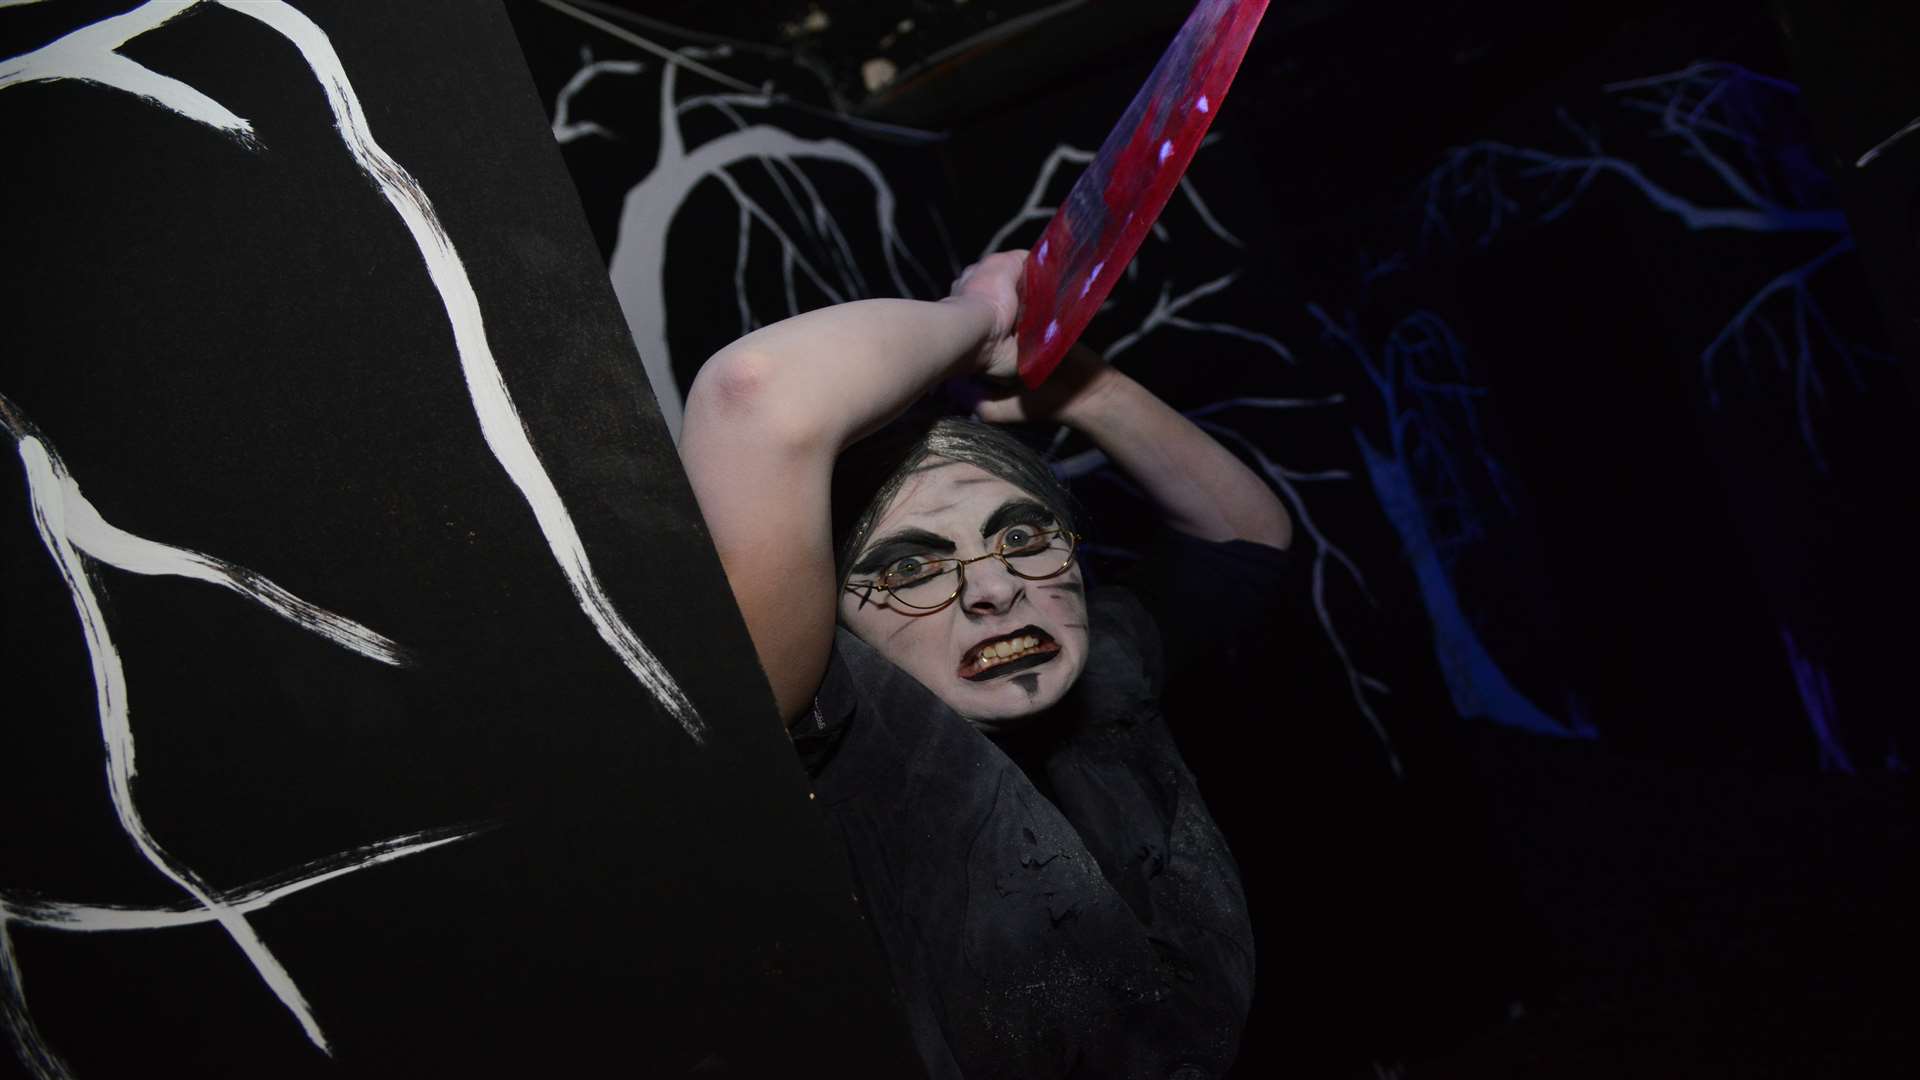 The Final Cut at Screamland this Halloween